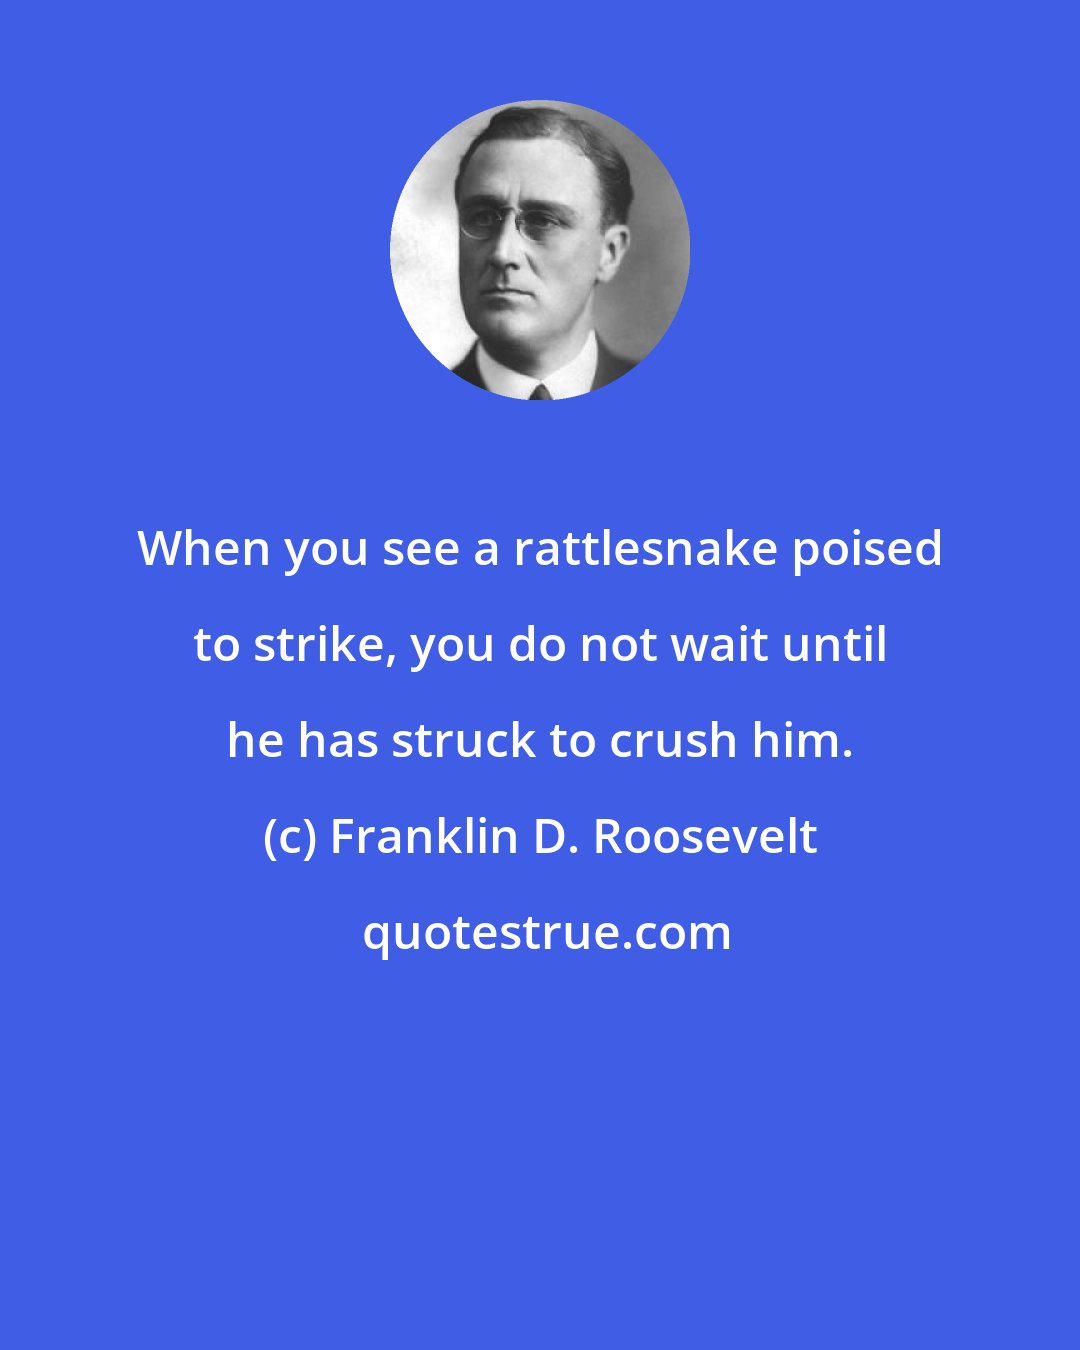 Franklin D. Roosevelt: When you see a rattlesnake poised to strike, you do not wait until he has struck to crush him.